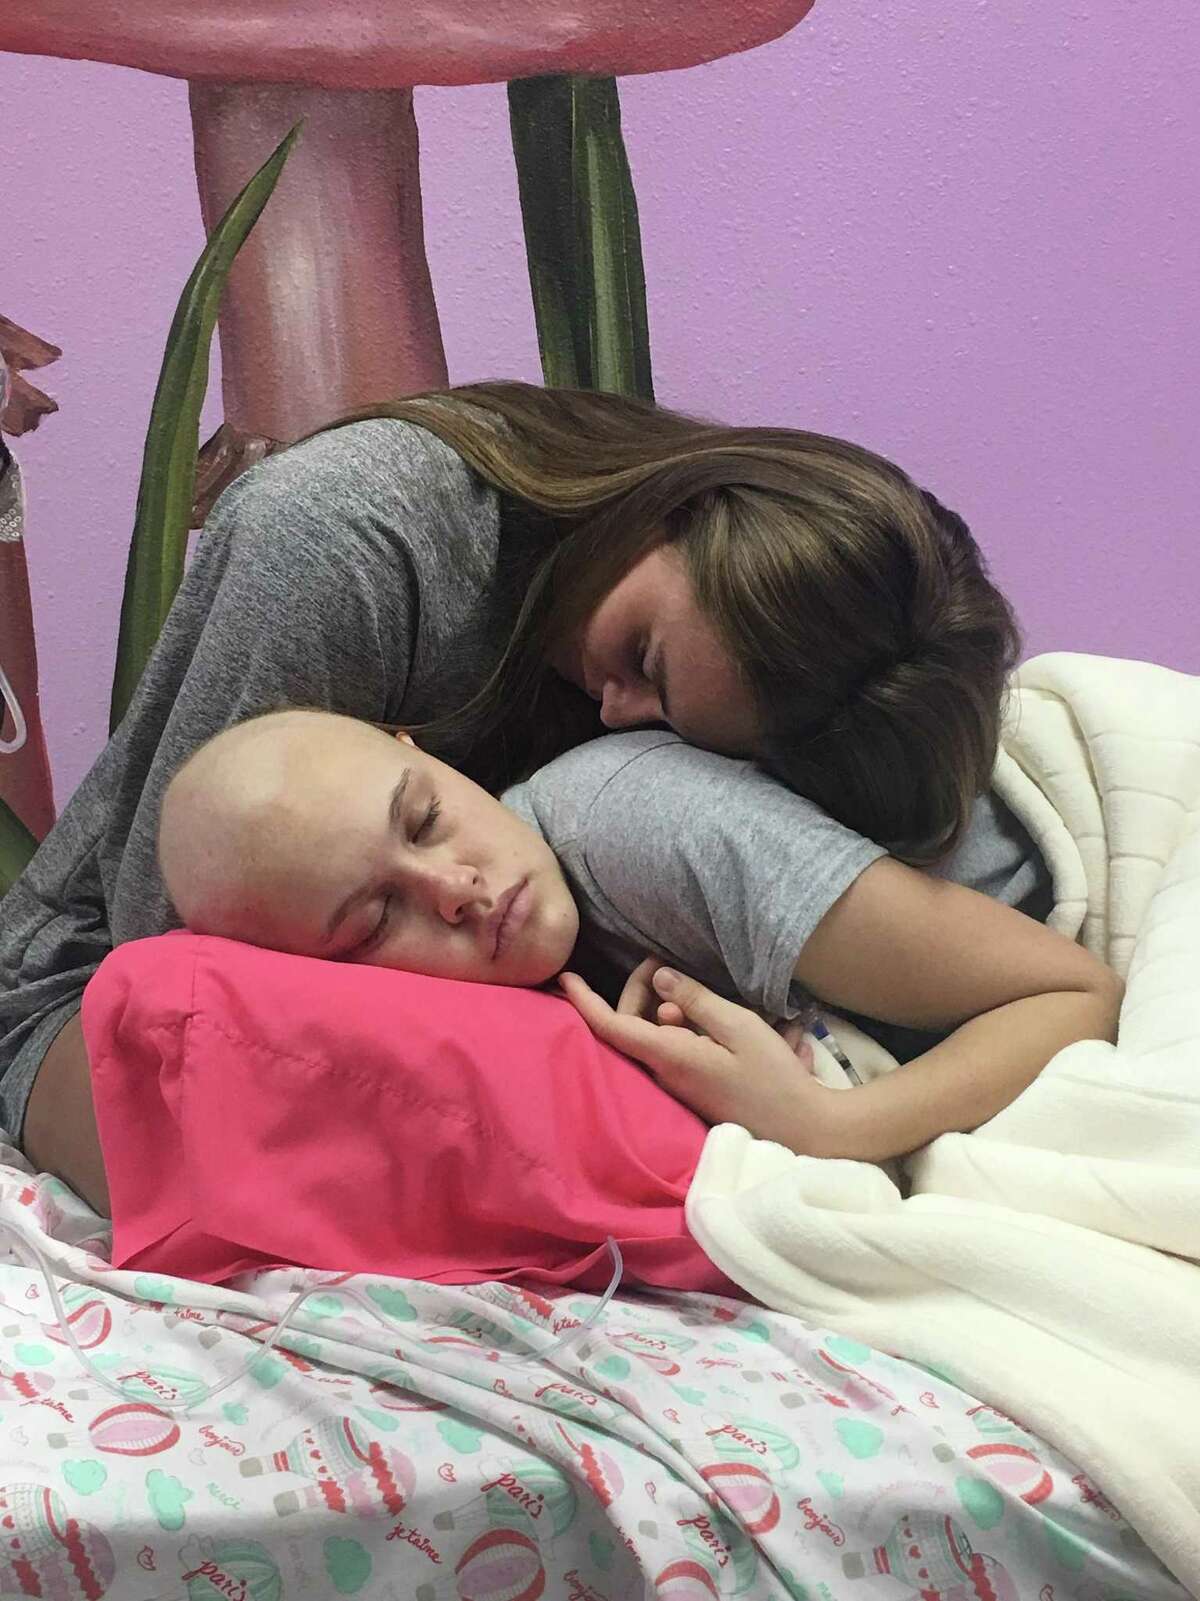 Paige Hare rests on her sister Presley as Presley goes through chemotherapy.